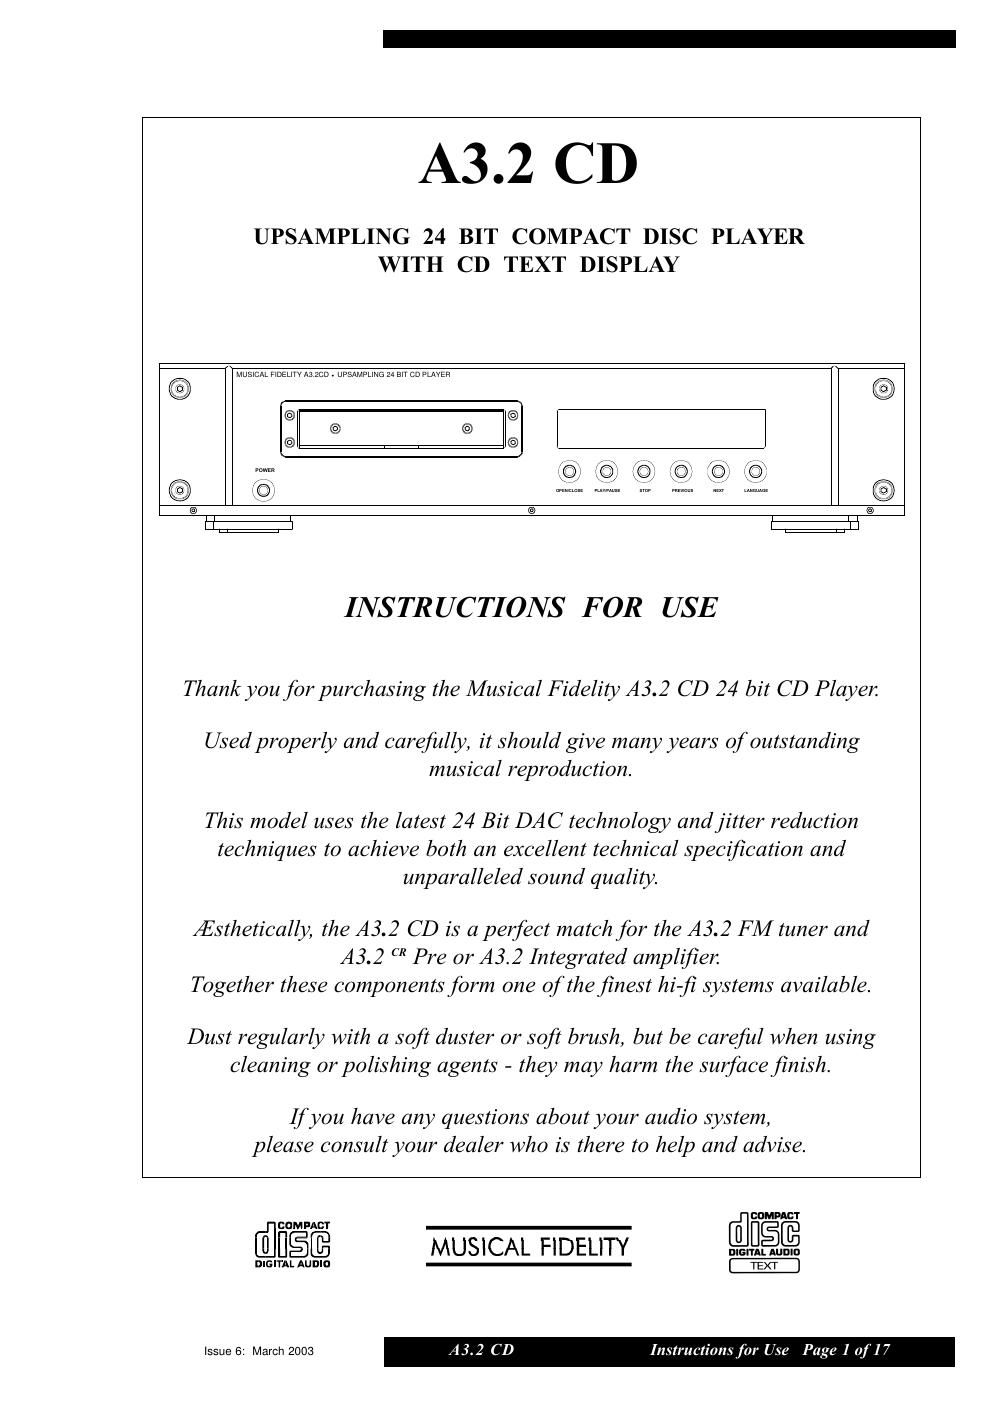 musical fidelity a 3 2 cr cd player owners manual